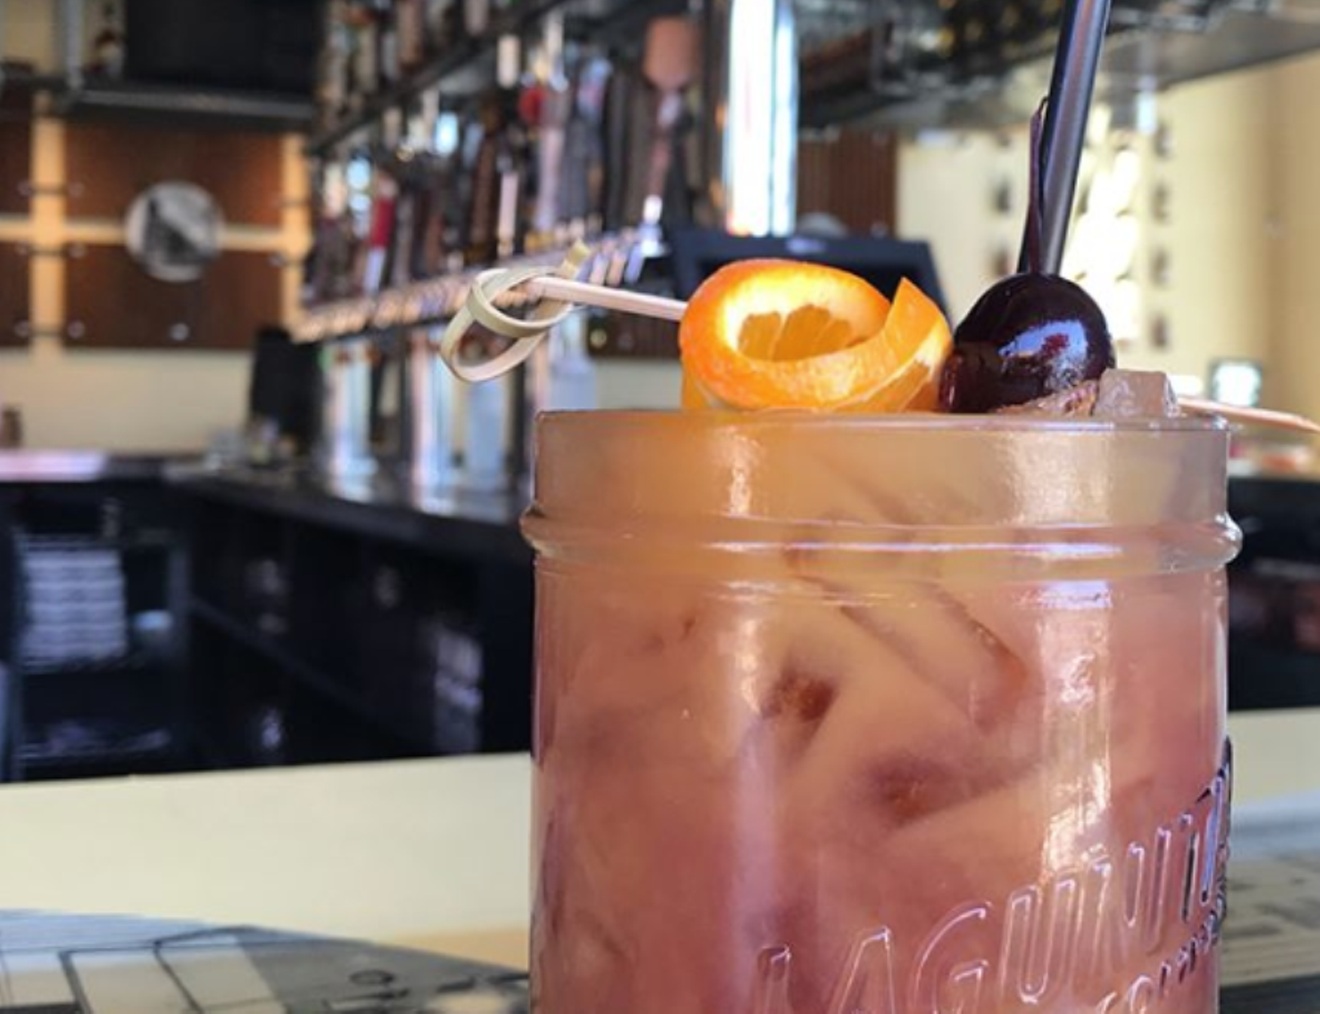 The Kentucky Sunrise is a brunch eye-opener at the Crafty Fox.